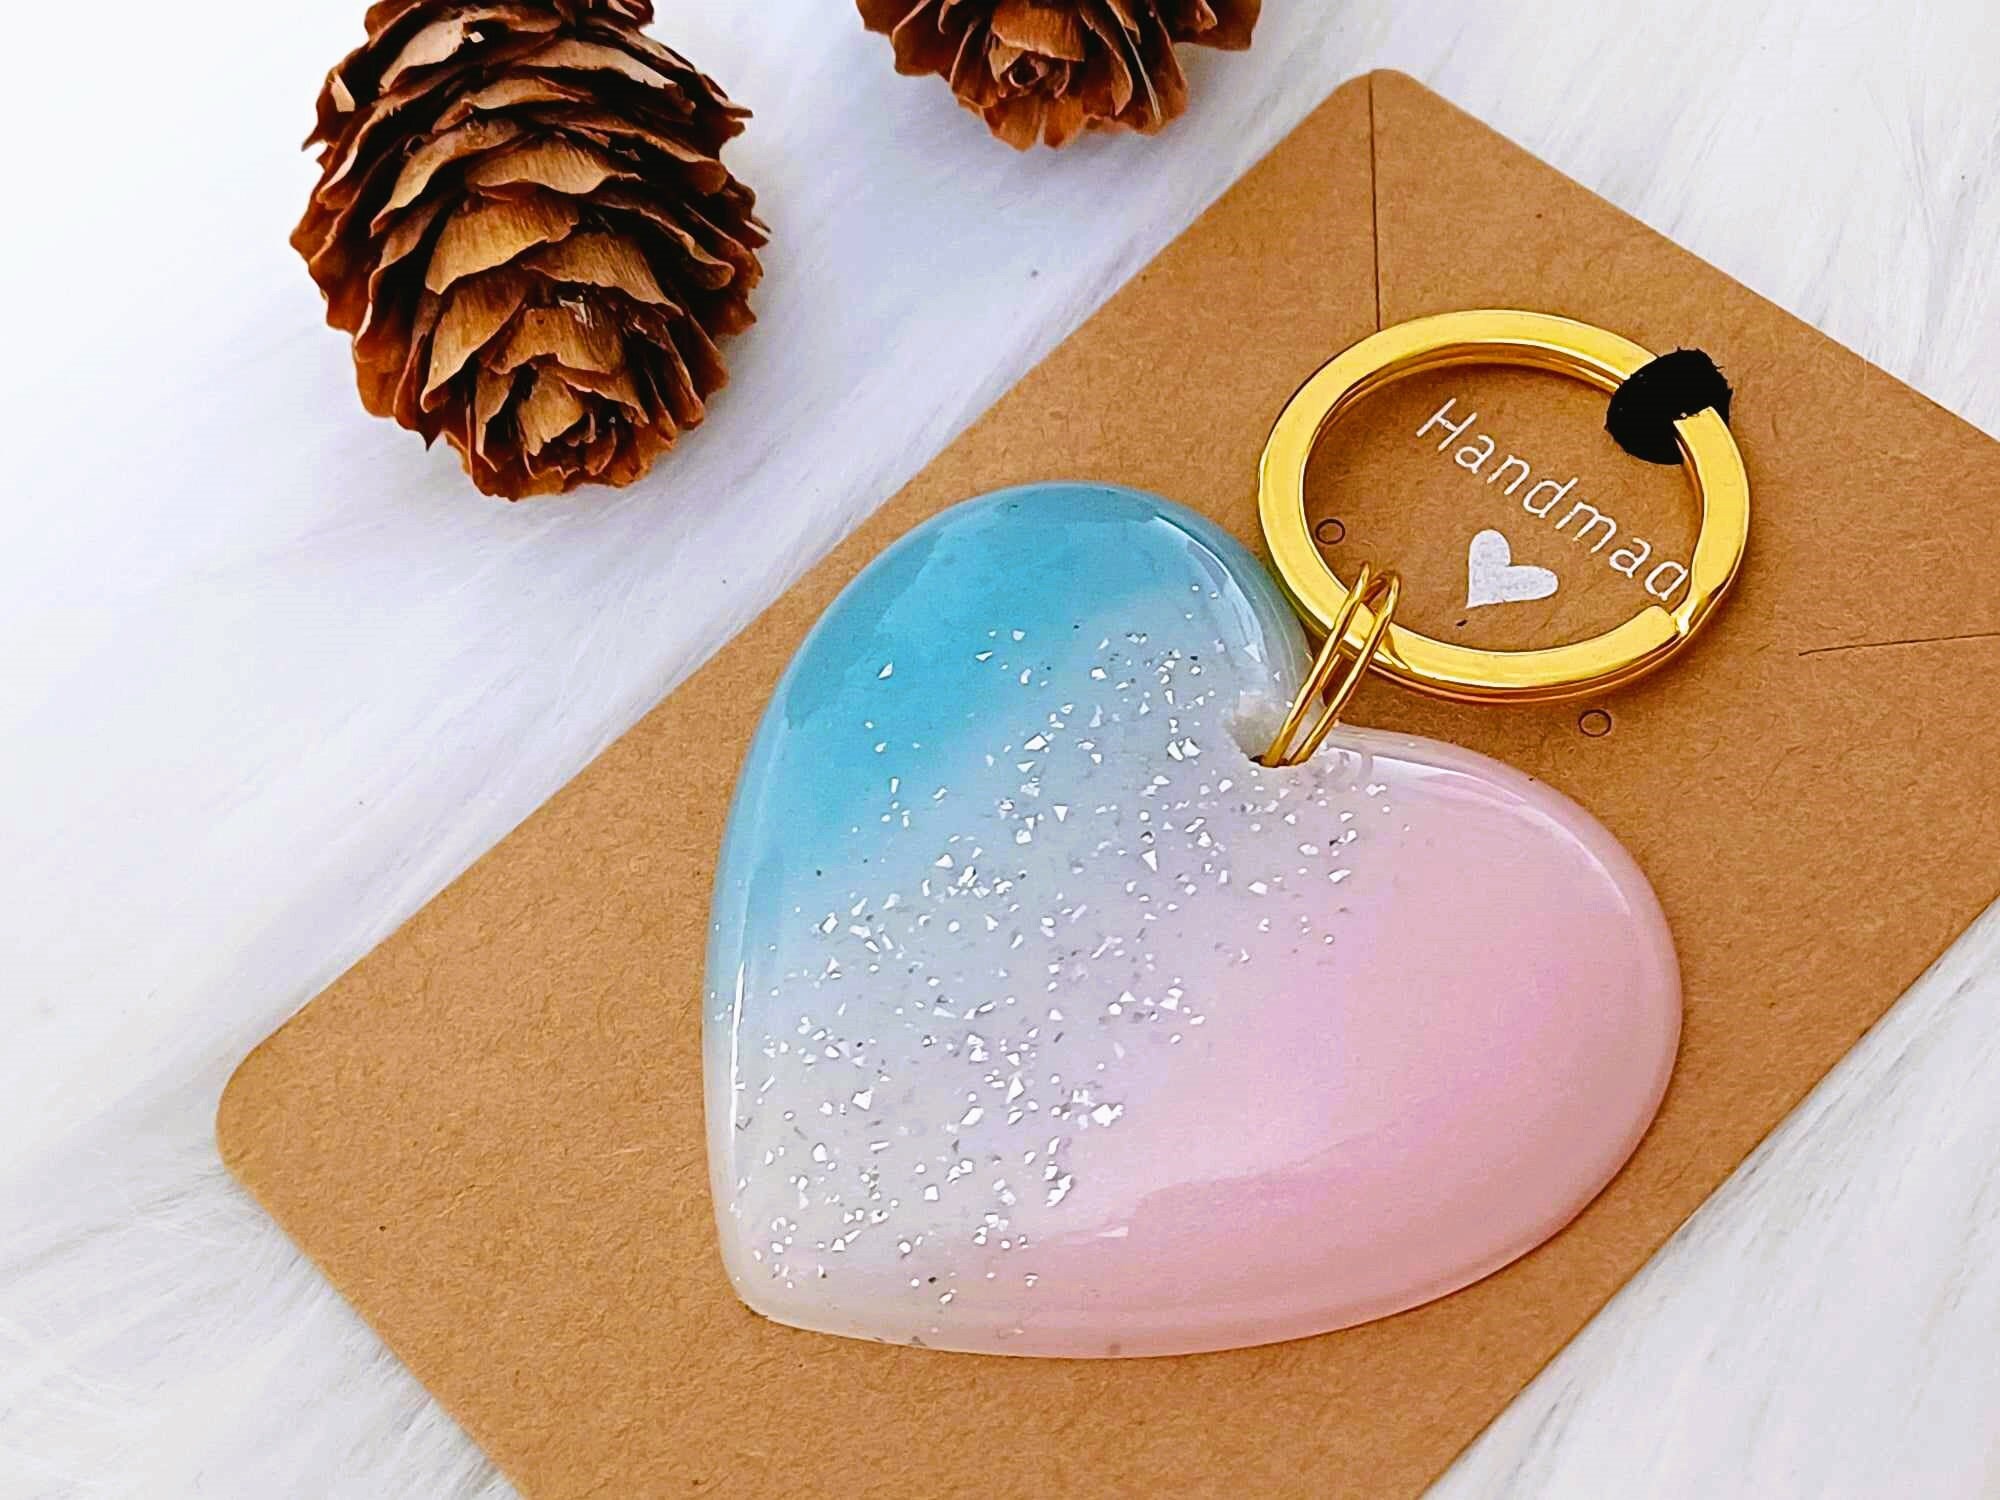 Small Love Heart Shaped Silicone Mold-kawaii Heart Shaped Resin Molds-uv  Resin Jewelry Casting Mold-epoxy Resin Molds for Jewelry 